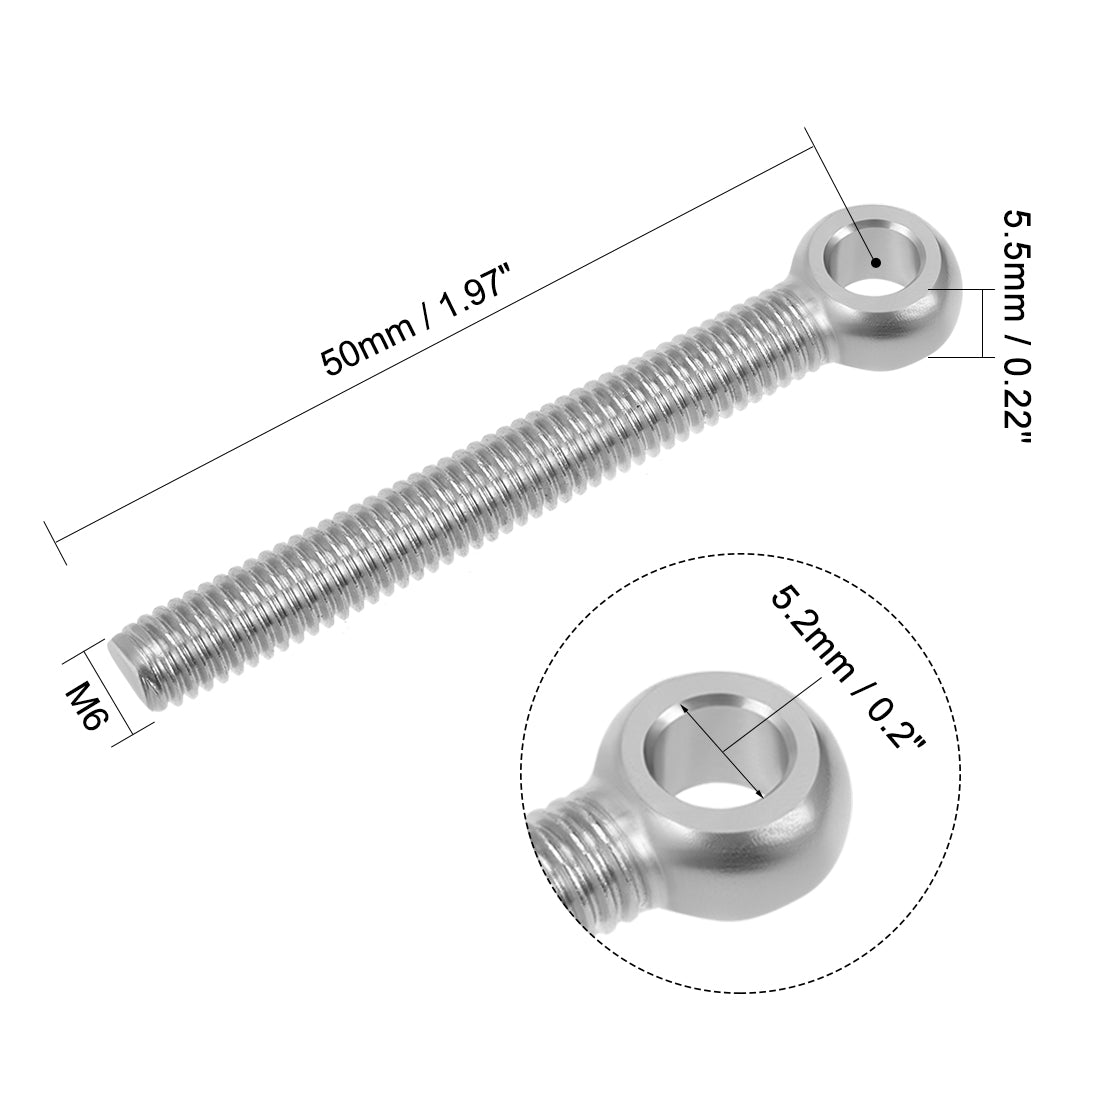 uxcell Uxcell M6 x 50mm Machinery Shoulder Swing Lifting Eye Bolt 304 Stainless Steel Metric Thread 10pcs